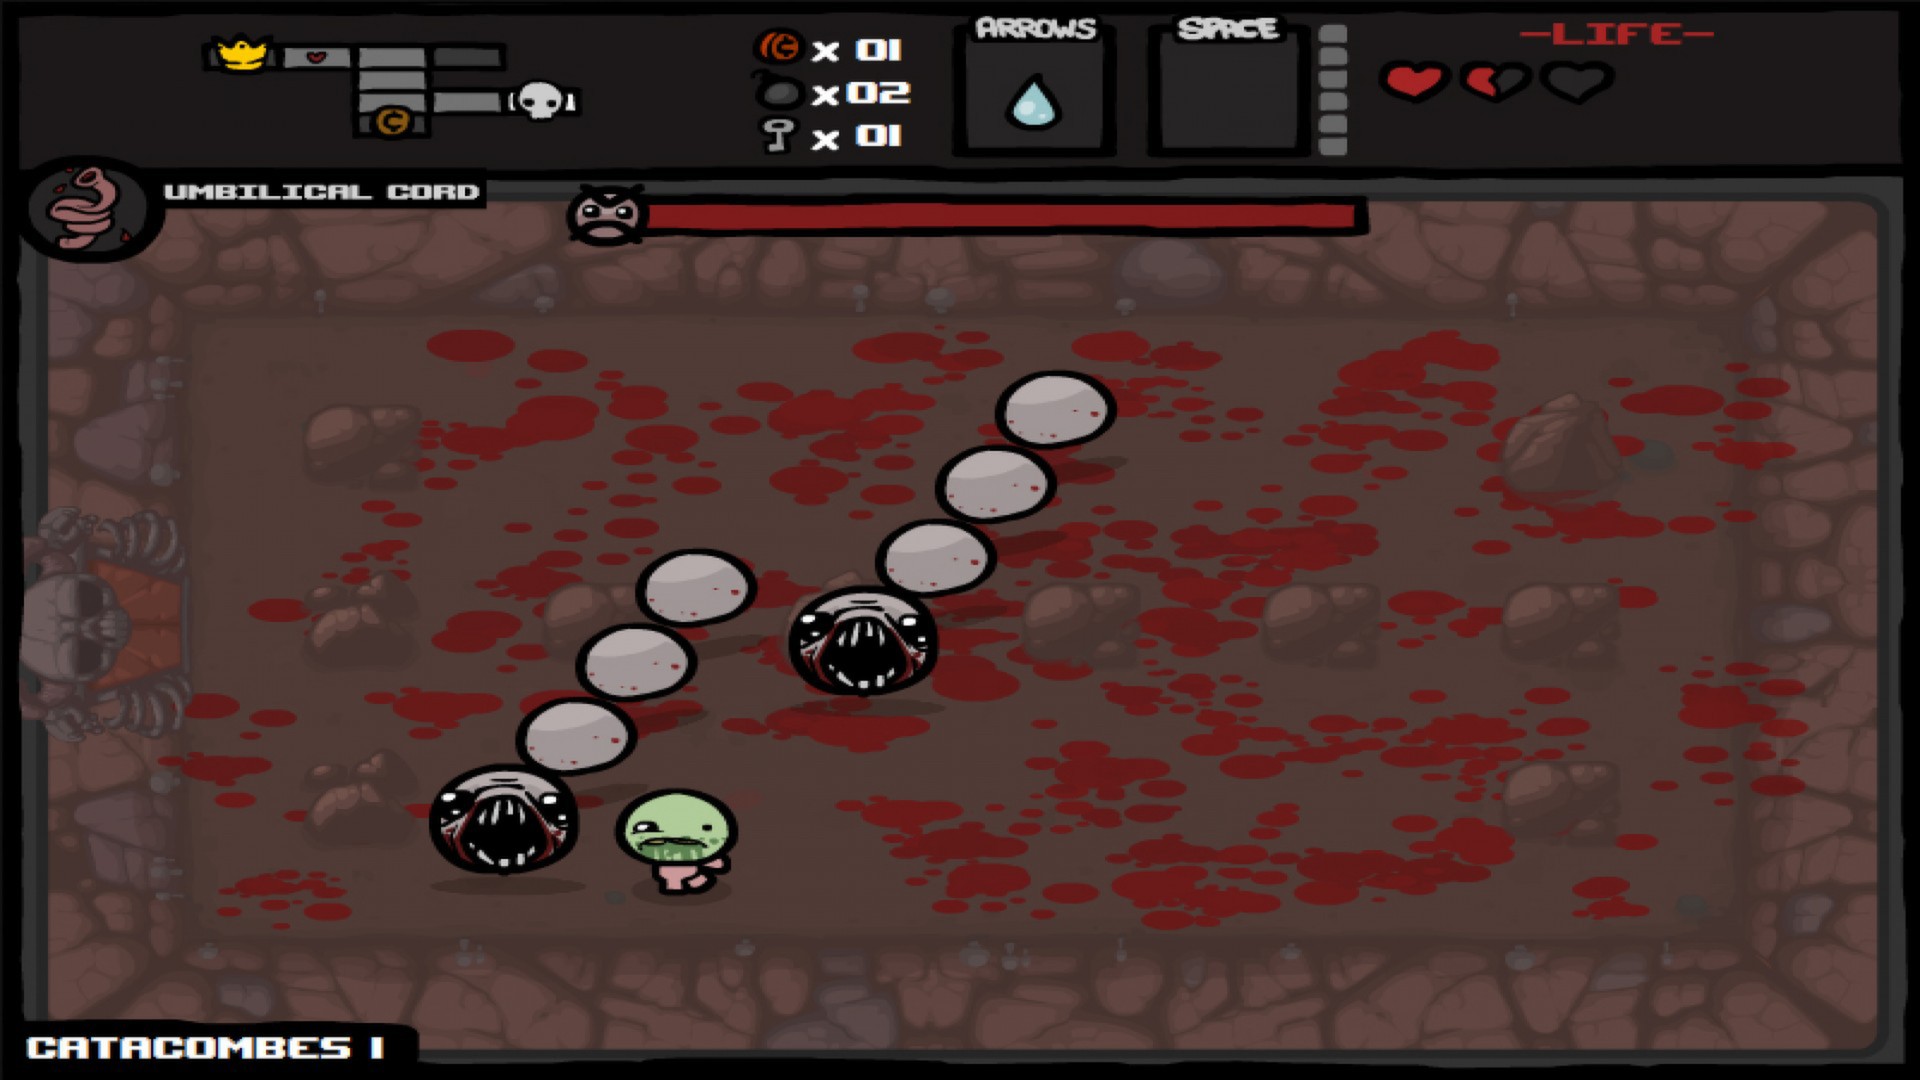 Binding of Isaac: Wrath of the Lamb on Steam